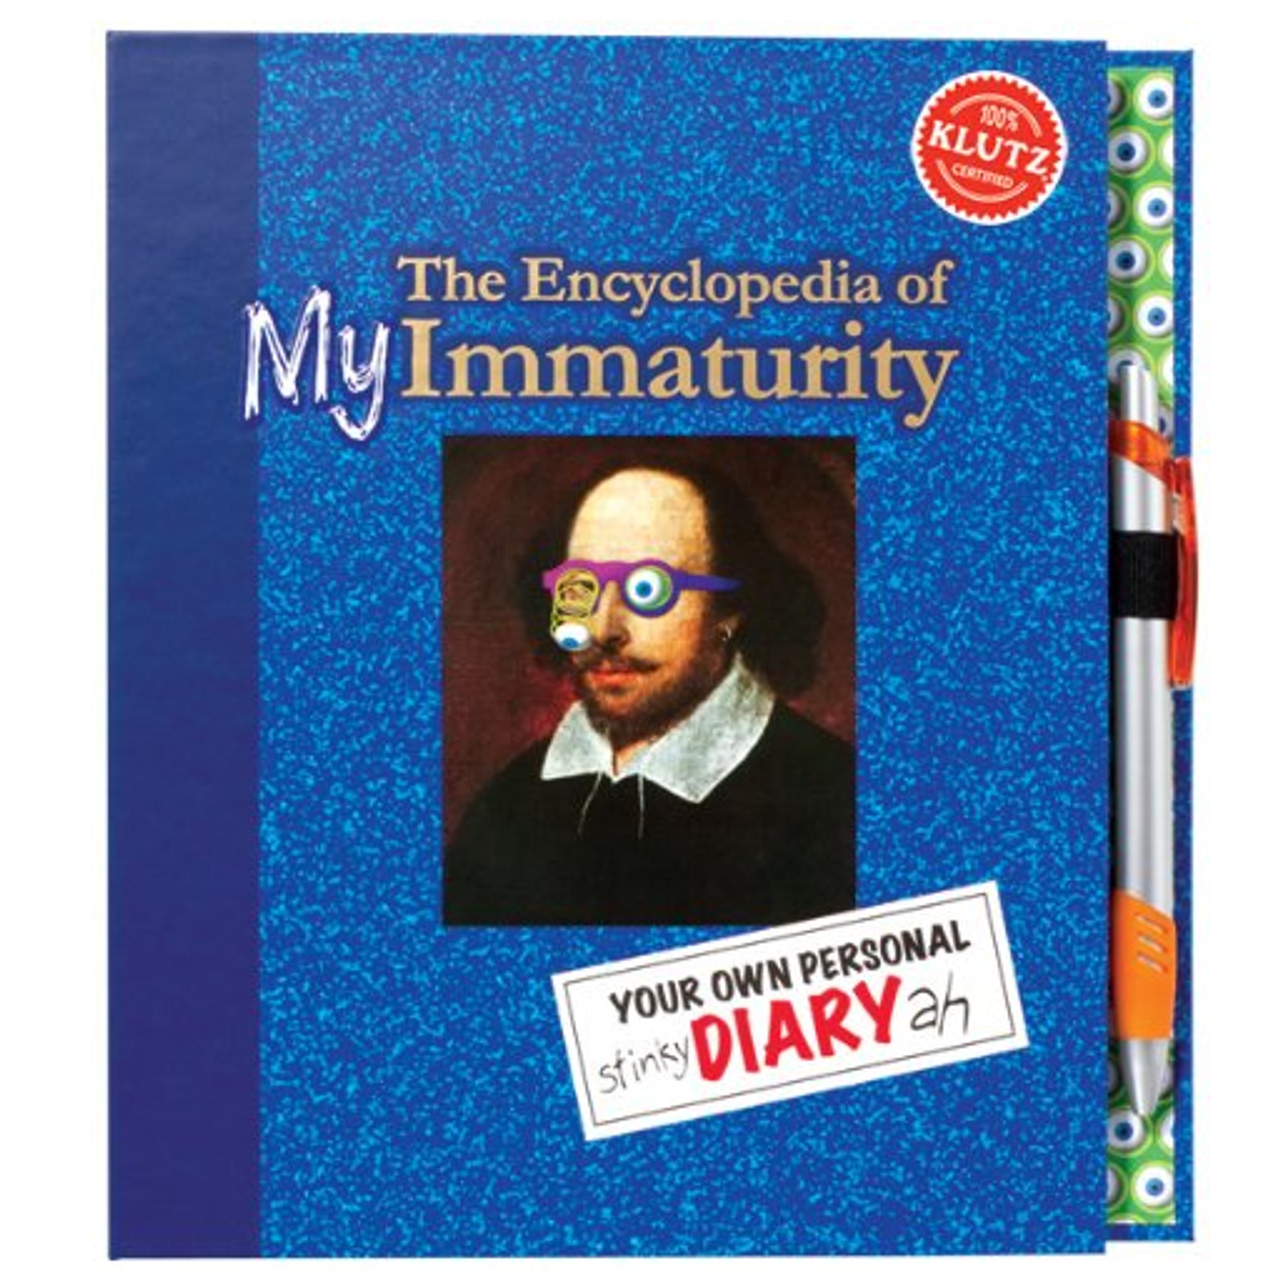 THE ENCYCLOPEDIA OF MY IMMATURITY YOUR OWN PERSONAL DIARY